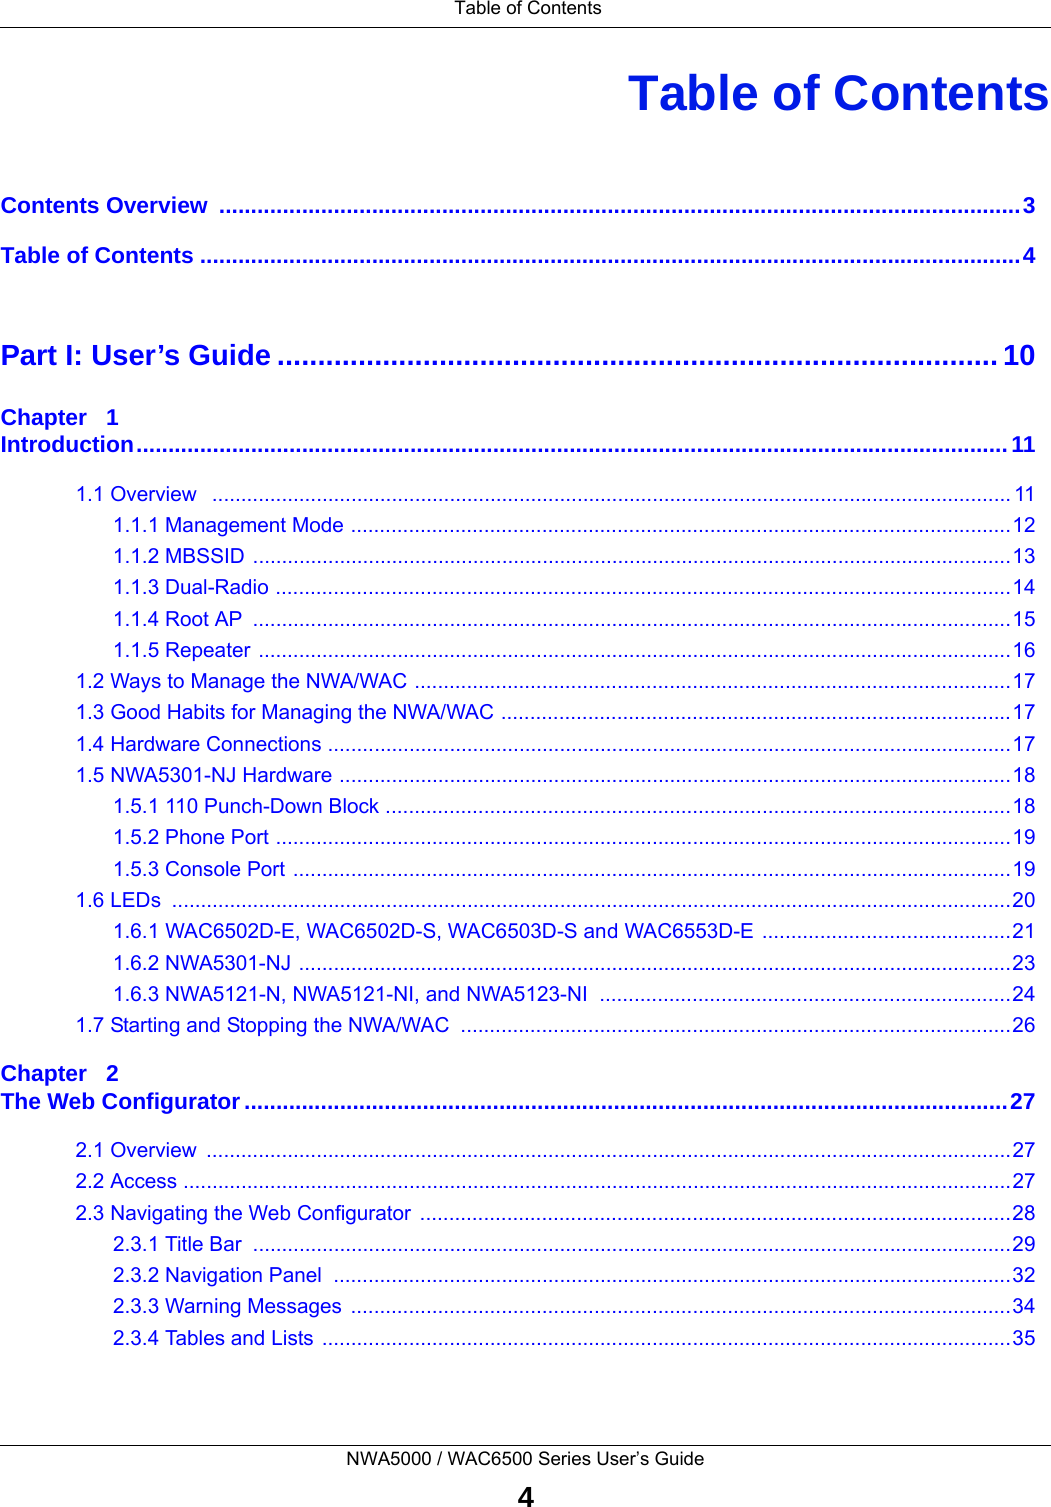 Table of ContentsNWA5000 / WAC6500 Series User’s Guide4Table of ContentsContents Overview  ..............................................................................................................................3Table of Contents .................................................................................................................................4Part I: User’s Guide ......................................................................................... 10Chapter   1Introduction.........................................................................................................................................111.1 Overview   .......................................................................................................................................... 111.1.1 Management Mode ..................................................................................................................121.1.2 MBSSID ...................................................................................................................................131.1.3 Dual-Radio ...............................................................................................................................141.1.4 Root AP  ...................................................................................................................................151.1.5 Repeater ..................................................................................................................................161.2 Ways to Manage the NWA/WAC .......................................................................................................171.3 Good Habits for Managing the NWA/WAC ........................................................................................171.4 Hardware Connections ......................................................................................................................171.5 NWA5301-NJ Hardware ....................................................................................................................181.5.1 110 Punch-Down Block ............................................................................................................181.5.2 Phone Port ...............................................................................................................................191.5.3 Console Port ............................................................................................................................191.6 LEDs  .................................................................................................................................................201.6.1 WAC6502D-E, WAC6502D-S, WAC6503D-S and WAC6553D-E ...........................................211.6.2 NWA5301-NJ ...........................................................................................................................231.6.3 NWA5121-N, NWA5121-NI, and NWA5123-NI  .......................................................................241.7 Starting and Stopping the NWA/WAC  ...............................................................................................26Chapter   2The Web Configurator........................................................................................................................272.1 Overview  ...........................................................................................................................................272.2 Access ...............................................................................................................................................272.3 Navigating the Web Configurator ......................................................................................................282.3.1 Title Bar  ...................................................................................................................................292.3.2 Navigation Panel  .....................................................................................................................322.3.3 Warning Messages  ..................................................................................................................342.3.4 Tables and Lists .......................................................................................................................35